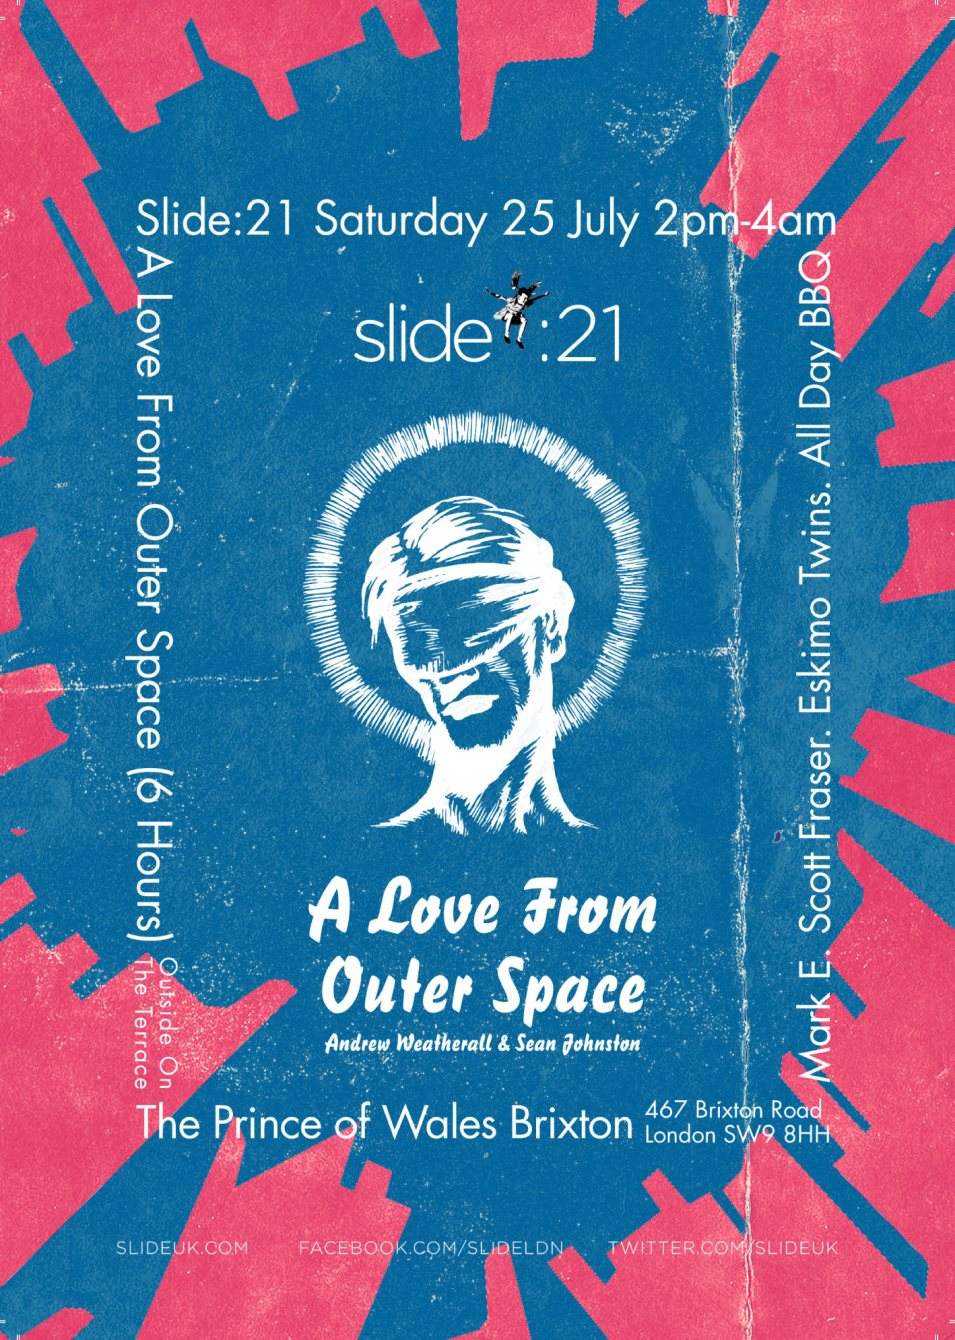 Slide:21 with A Love From Outer Space (Andrew Weatherall & Sean Johnston) - Página frontal